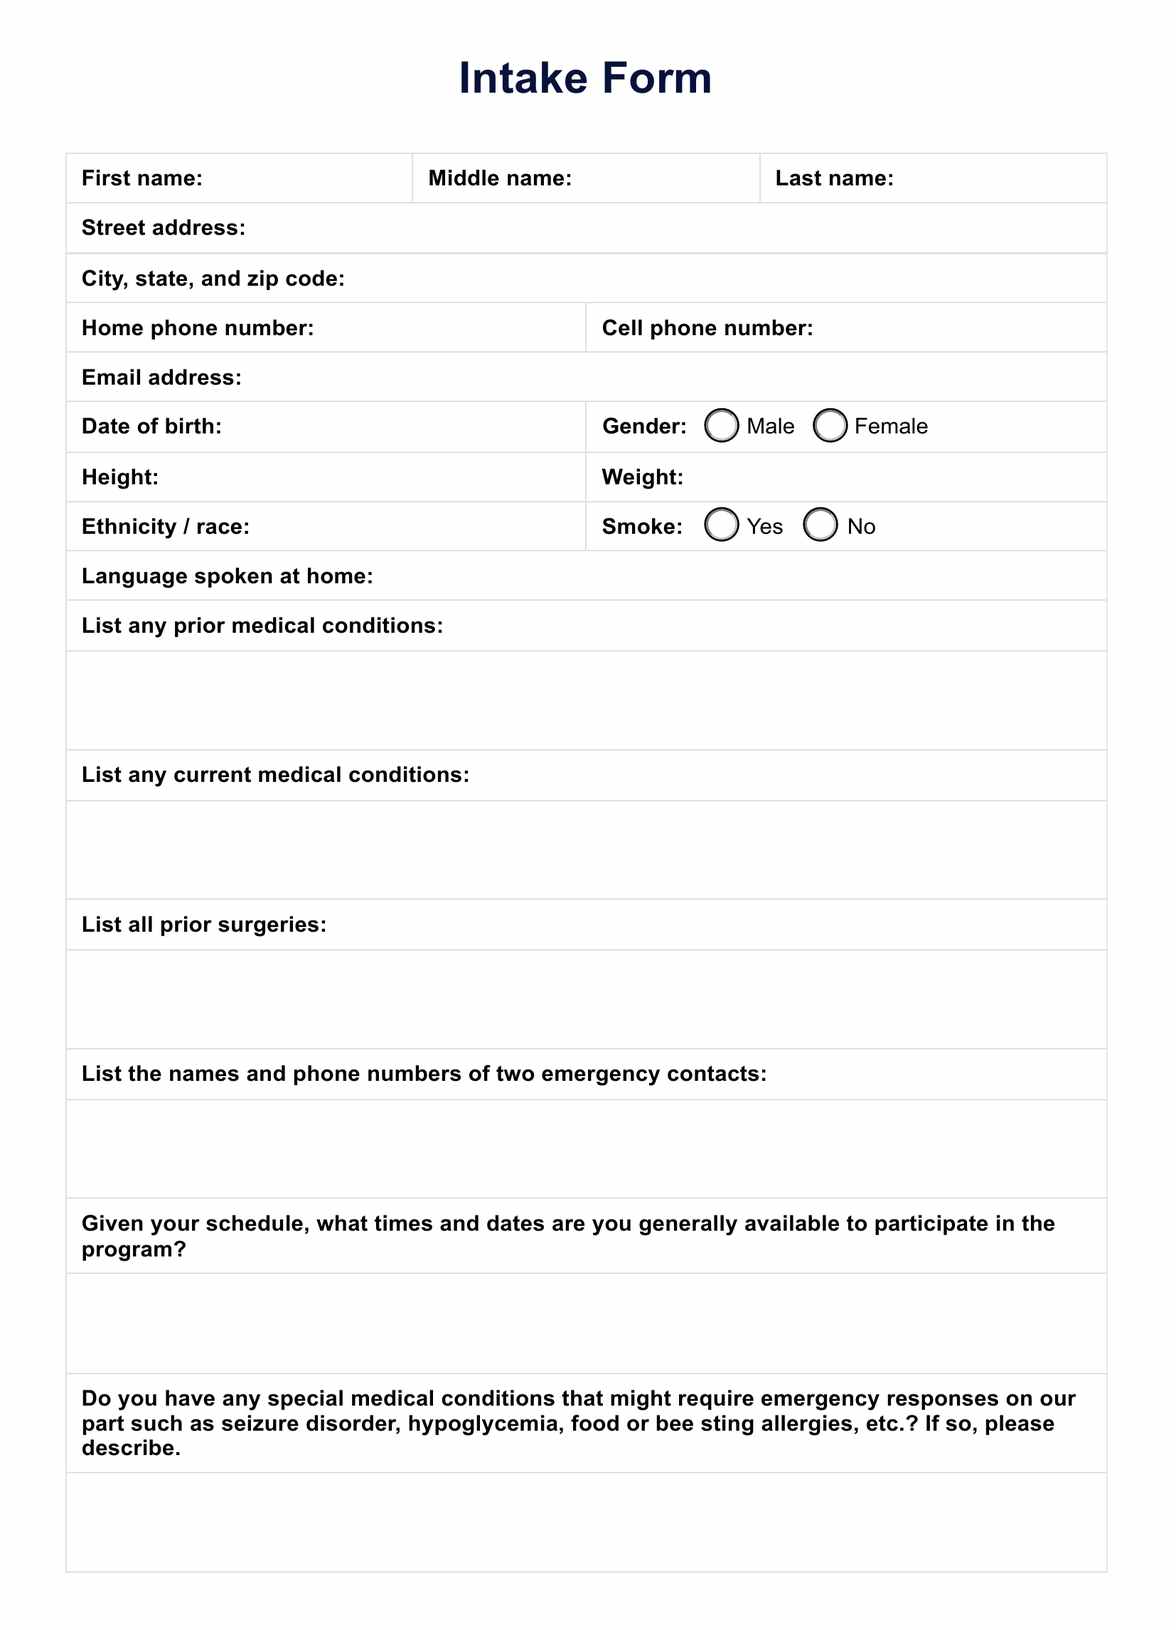 Intake Form Template PDF Example